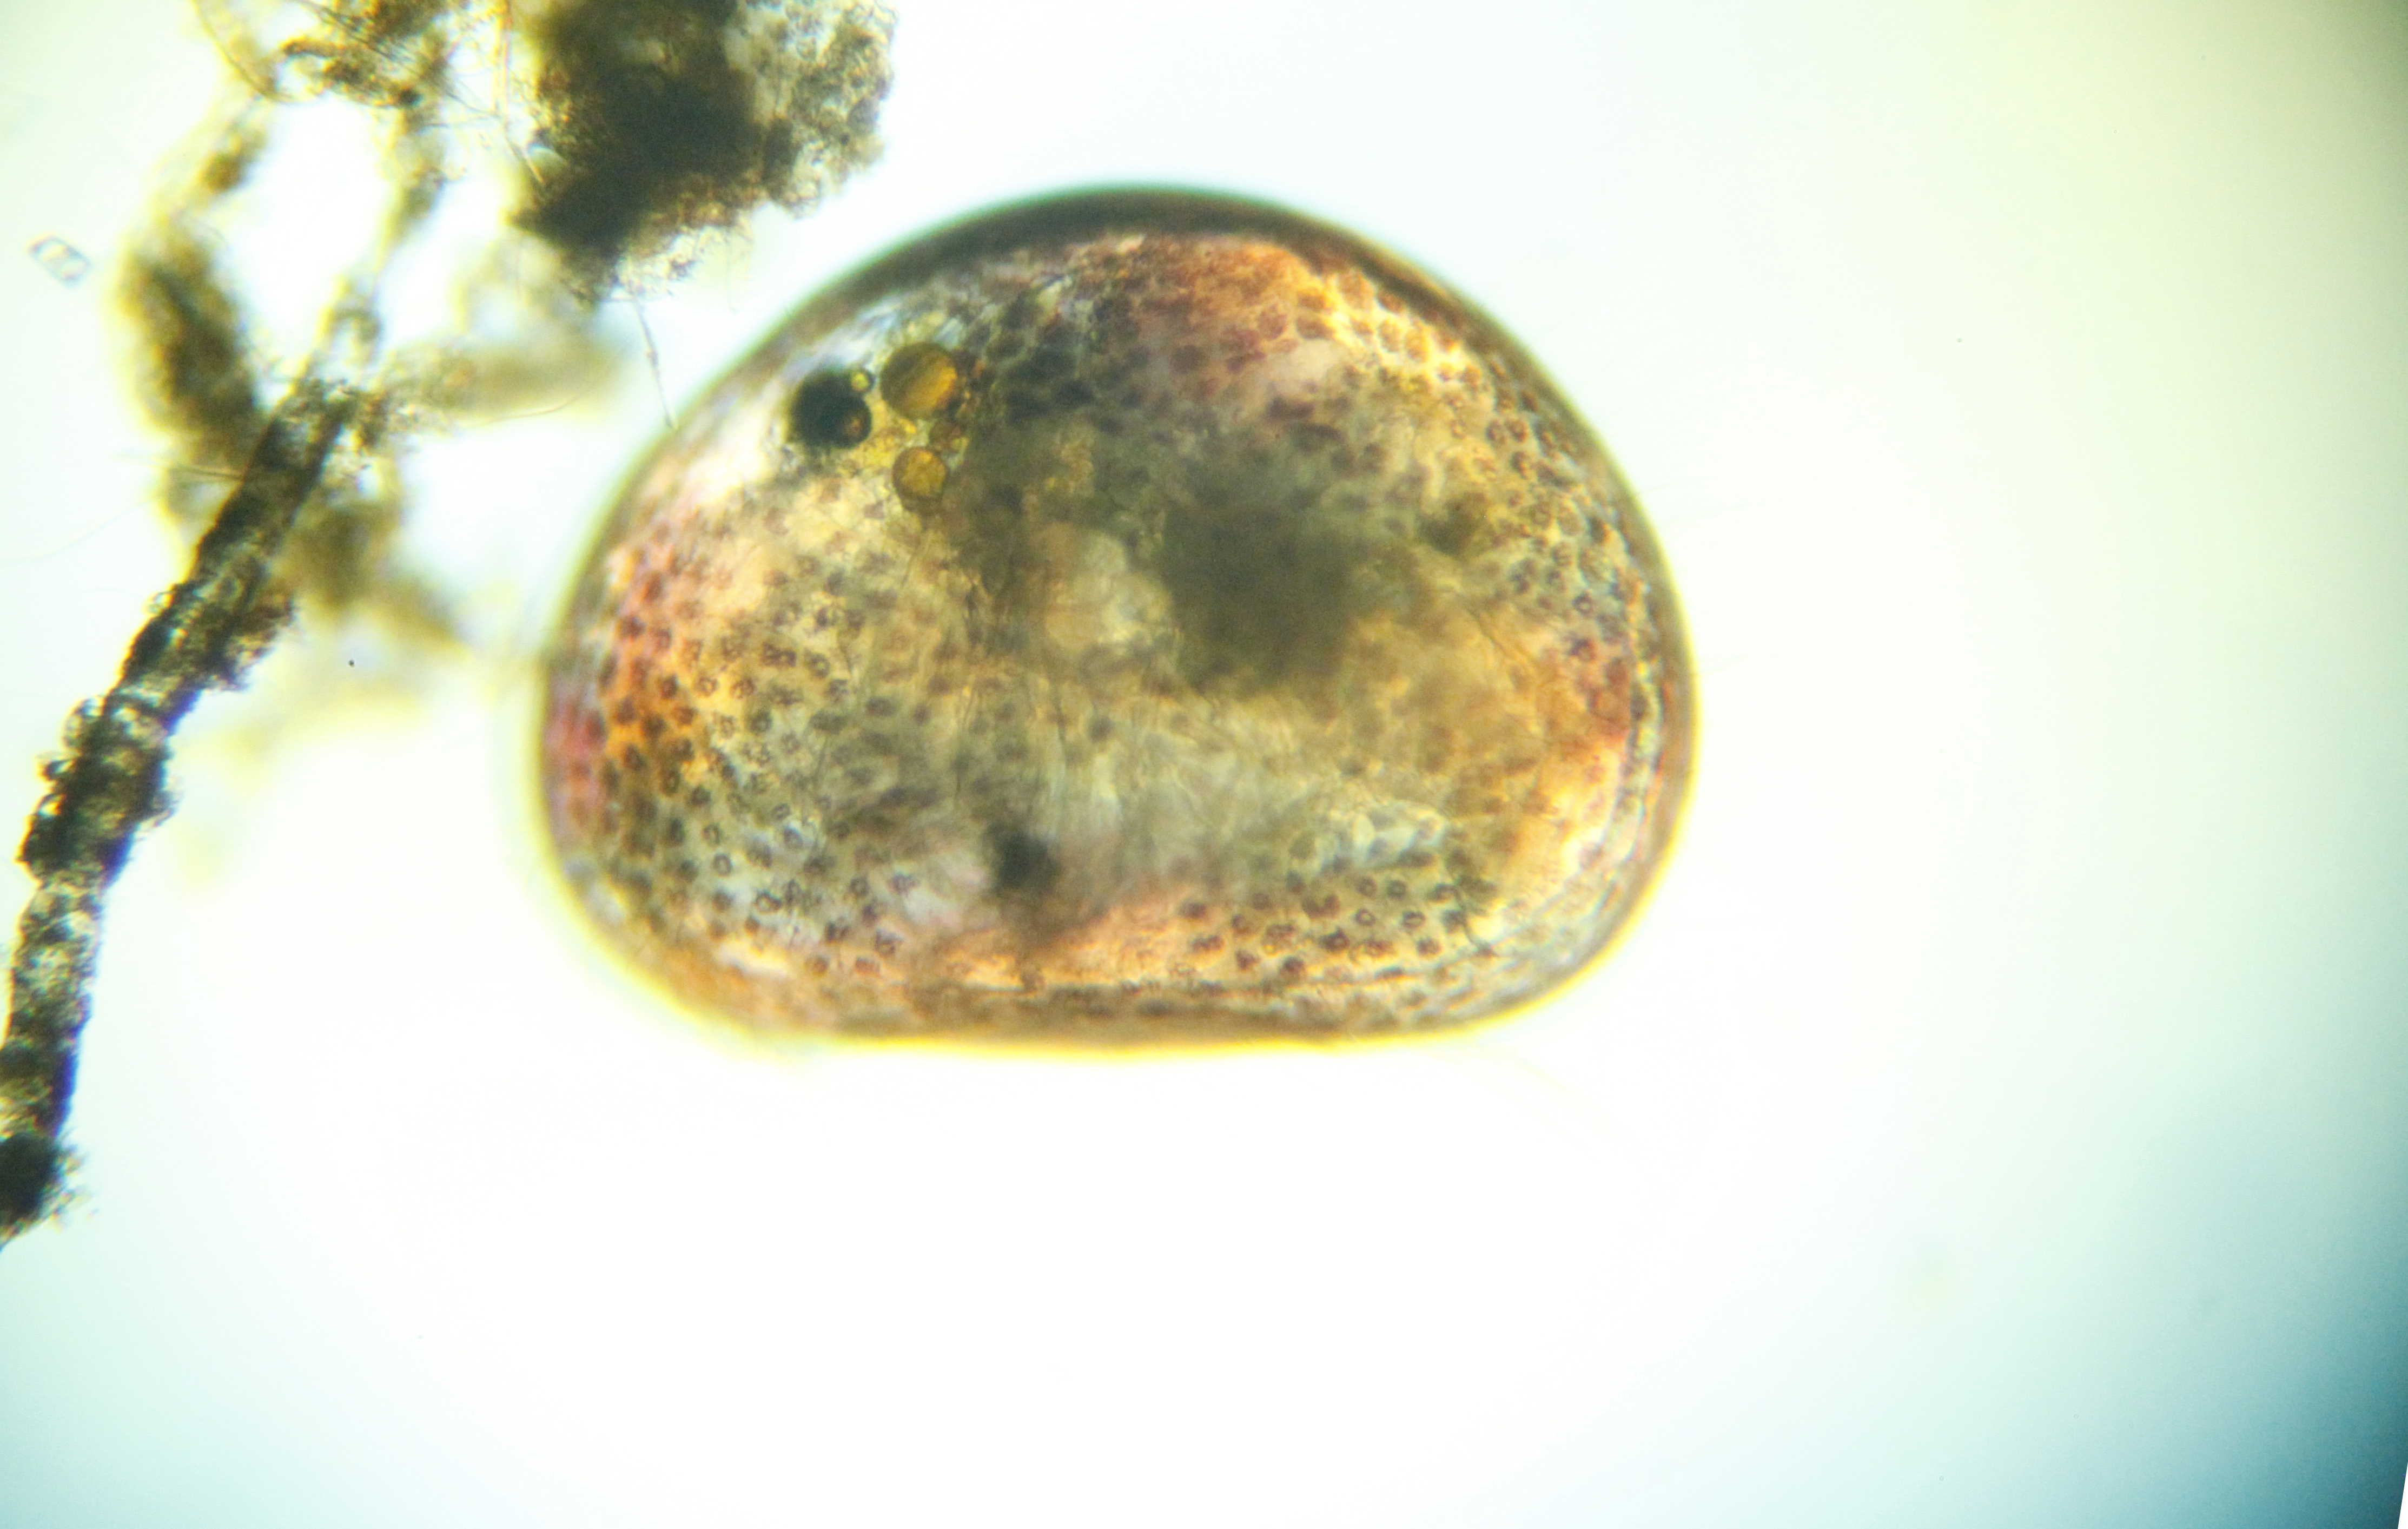 Cypris, l'ostracode